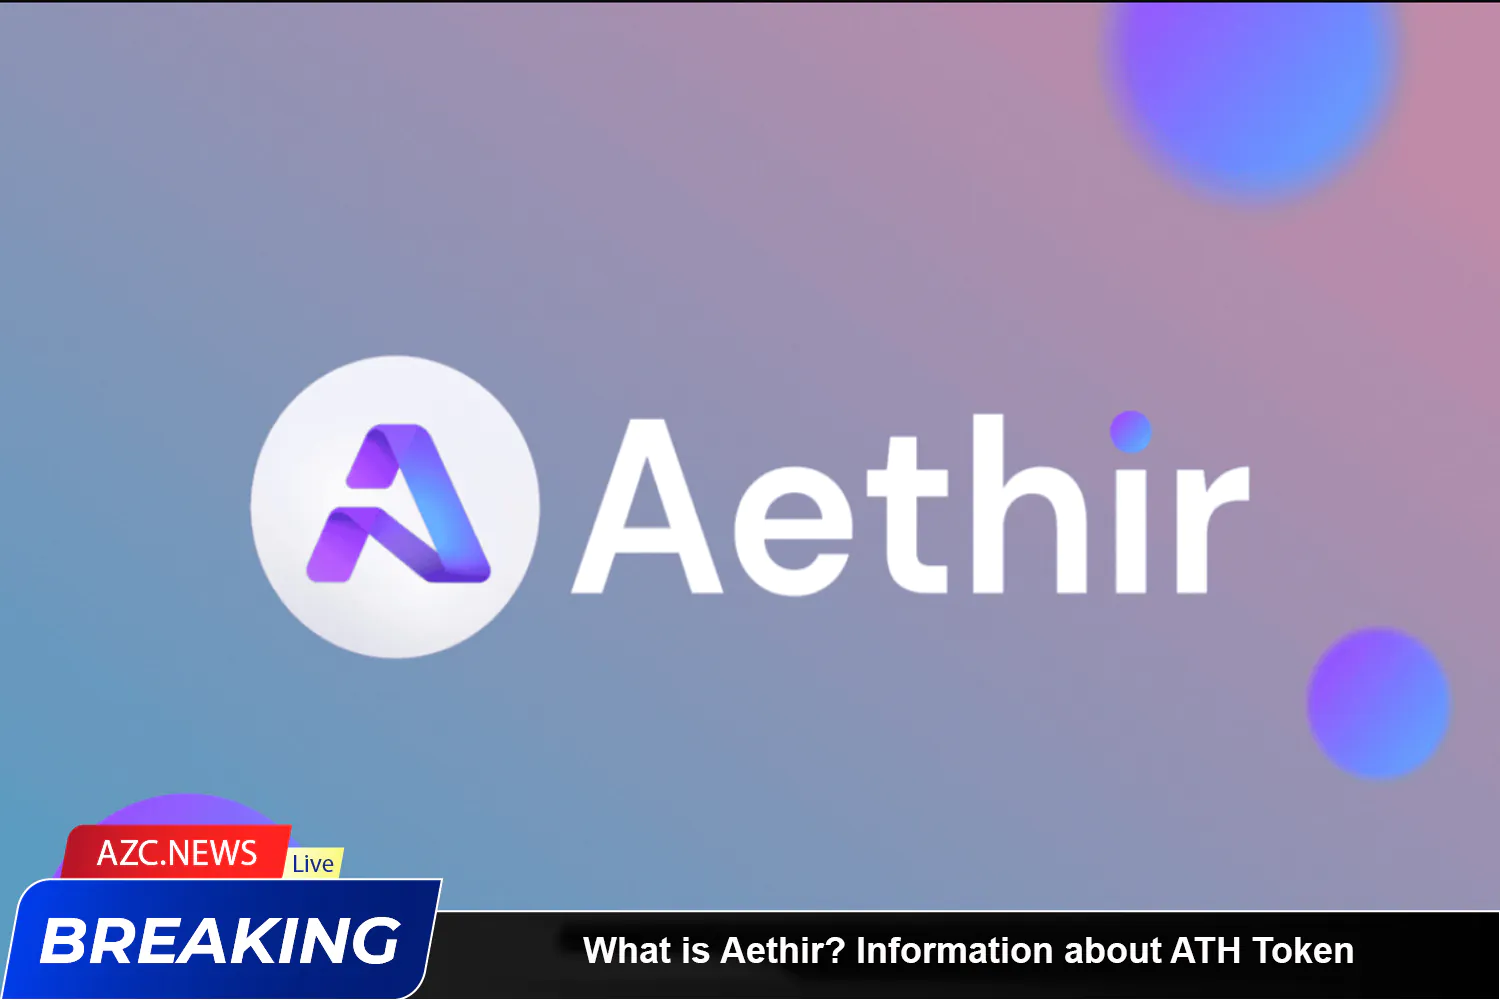 What Is Aethir Information About Ath Token